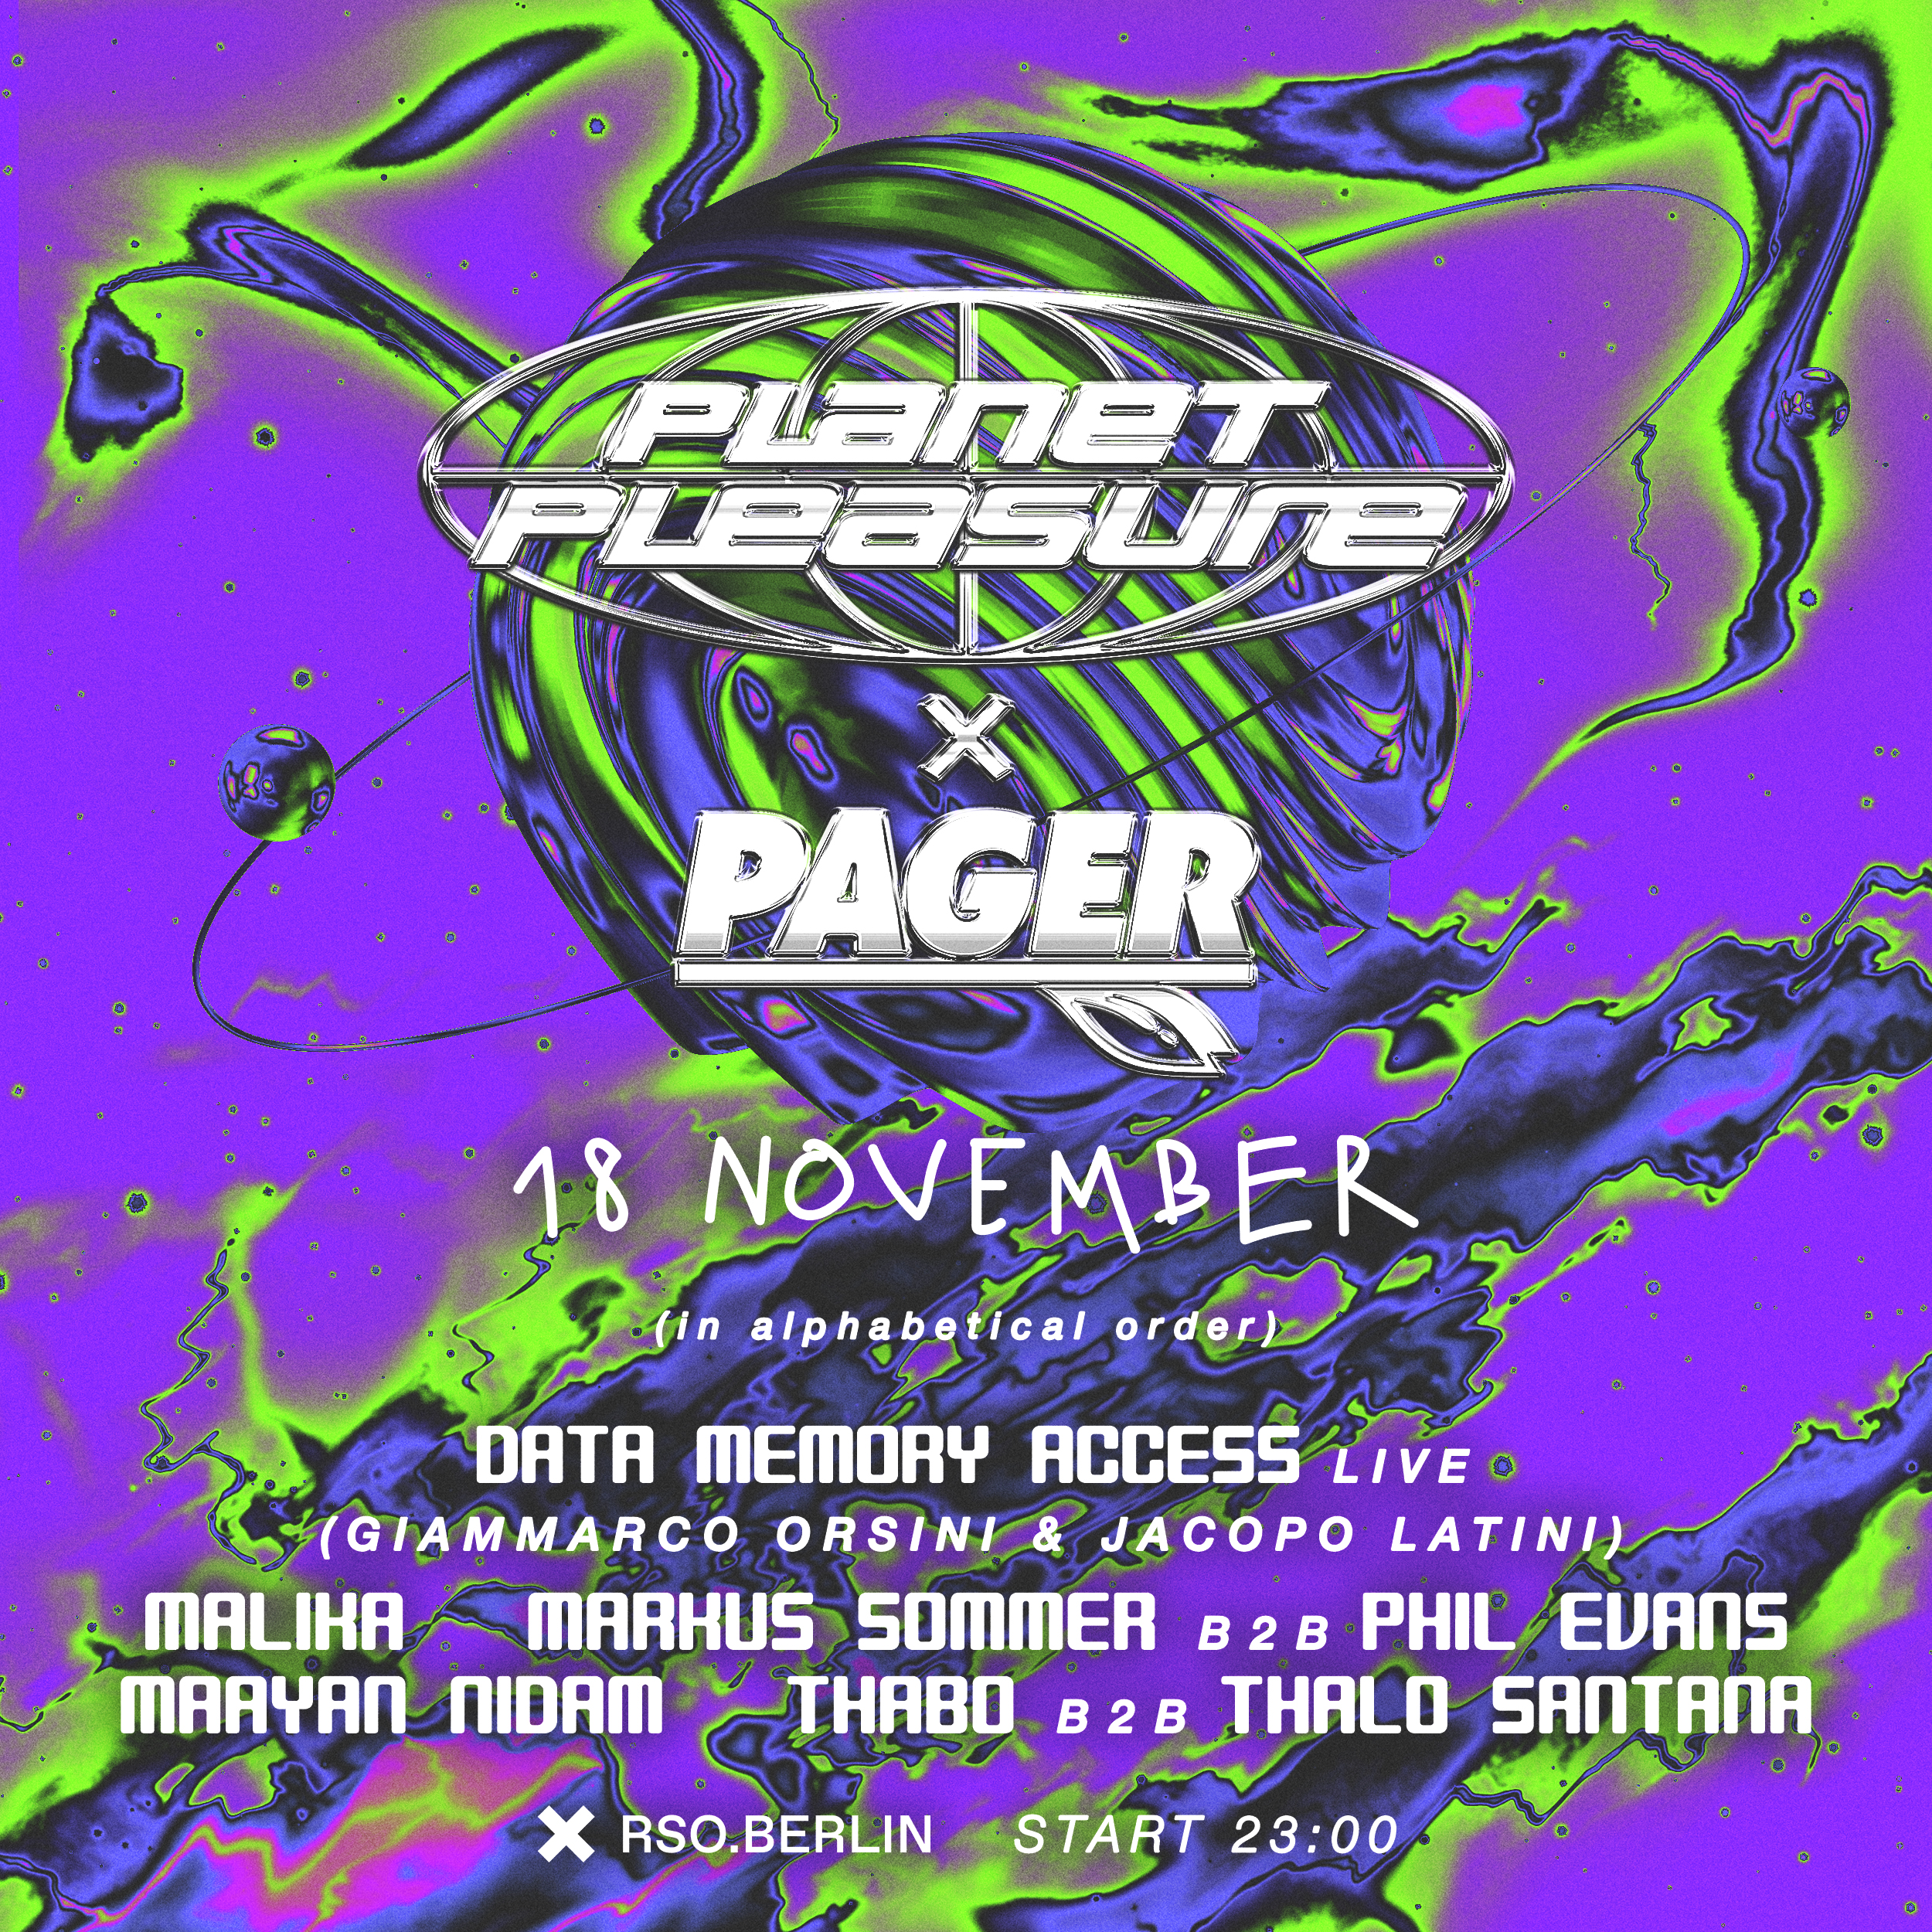 18.11. | Planet Pleasure x Pager Records w/ Mayaan Nidam, Data Memory Access, Markus Sommer